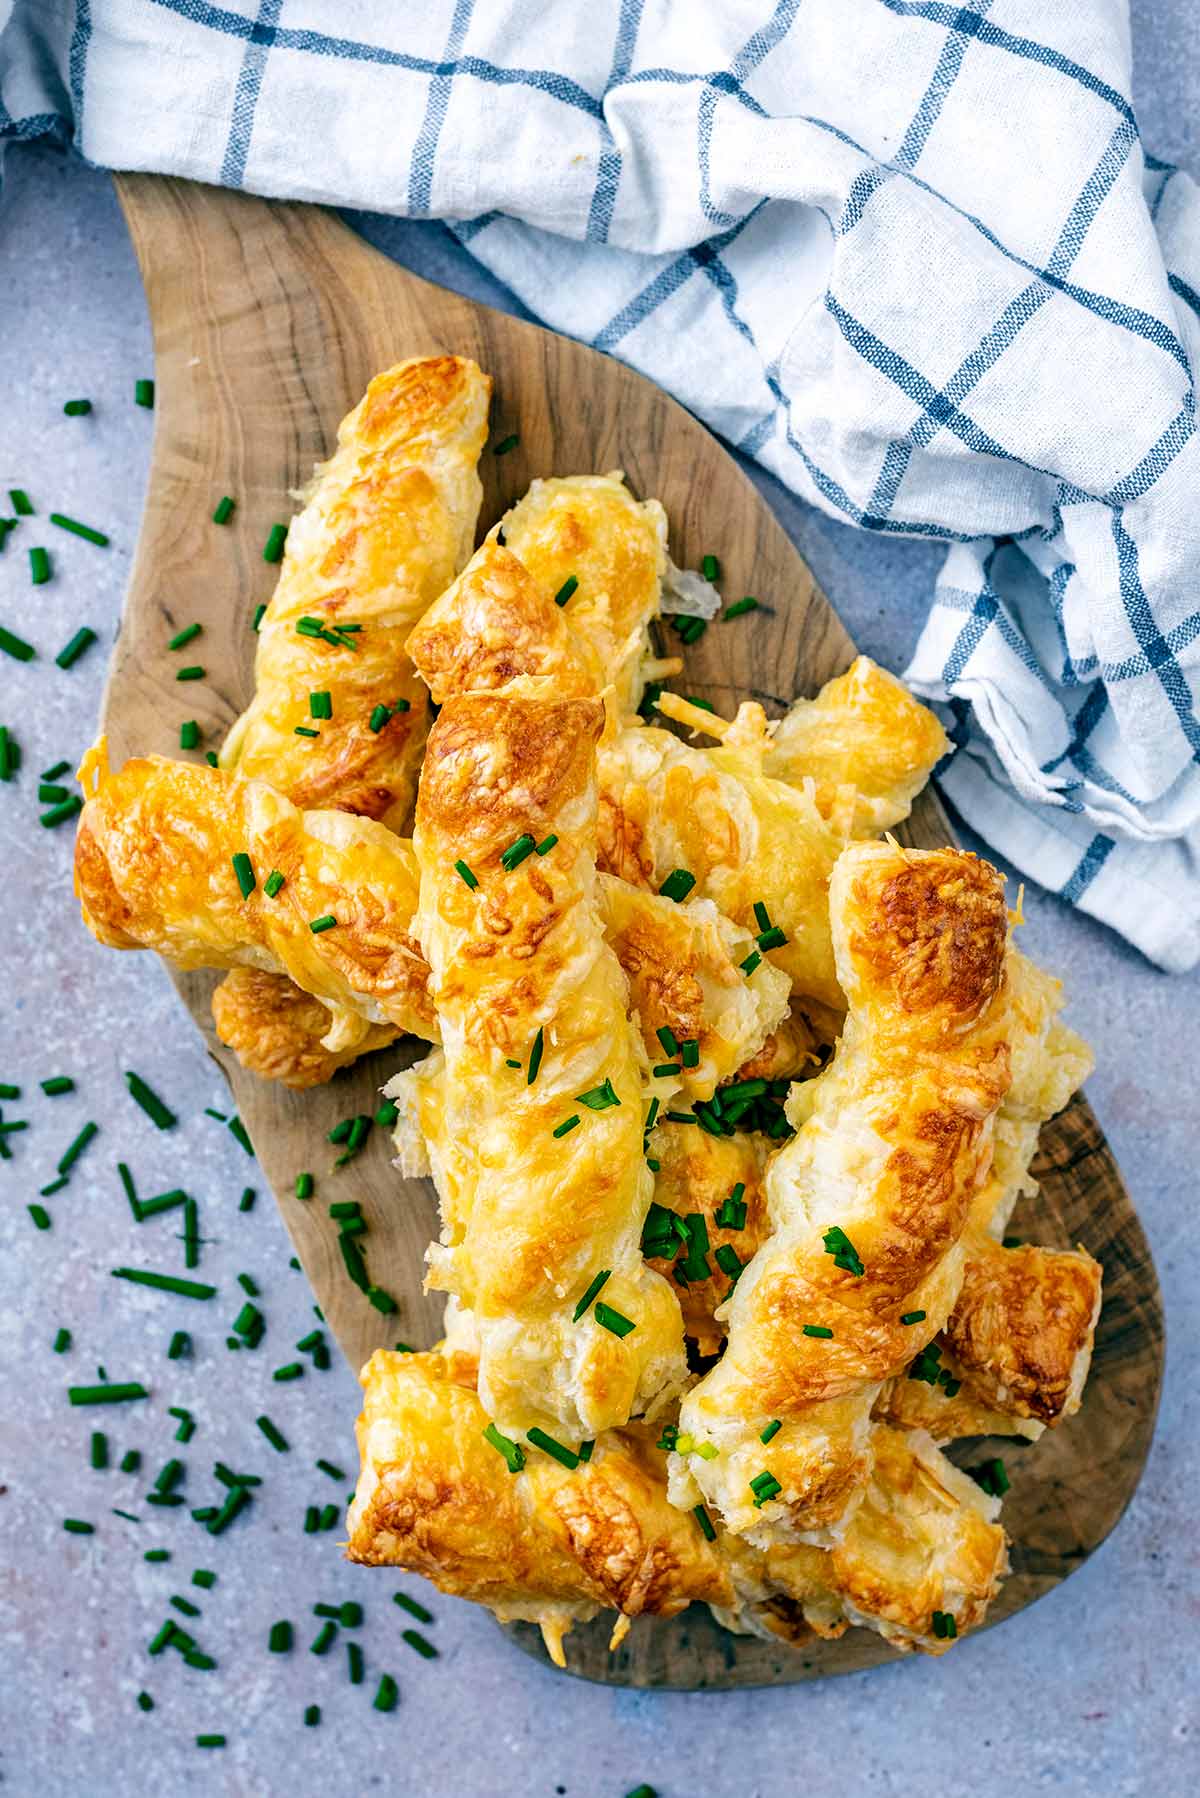 A pile of cheese straws on a wooden serving board.